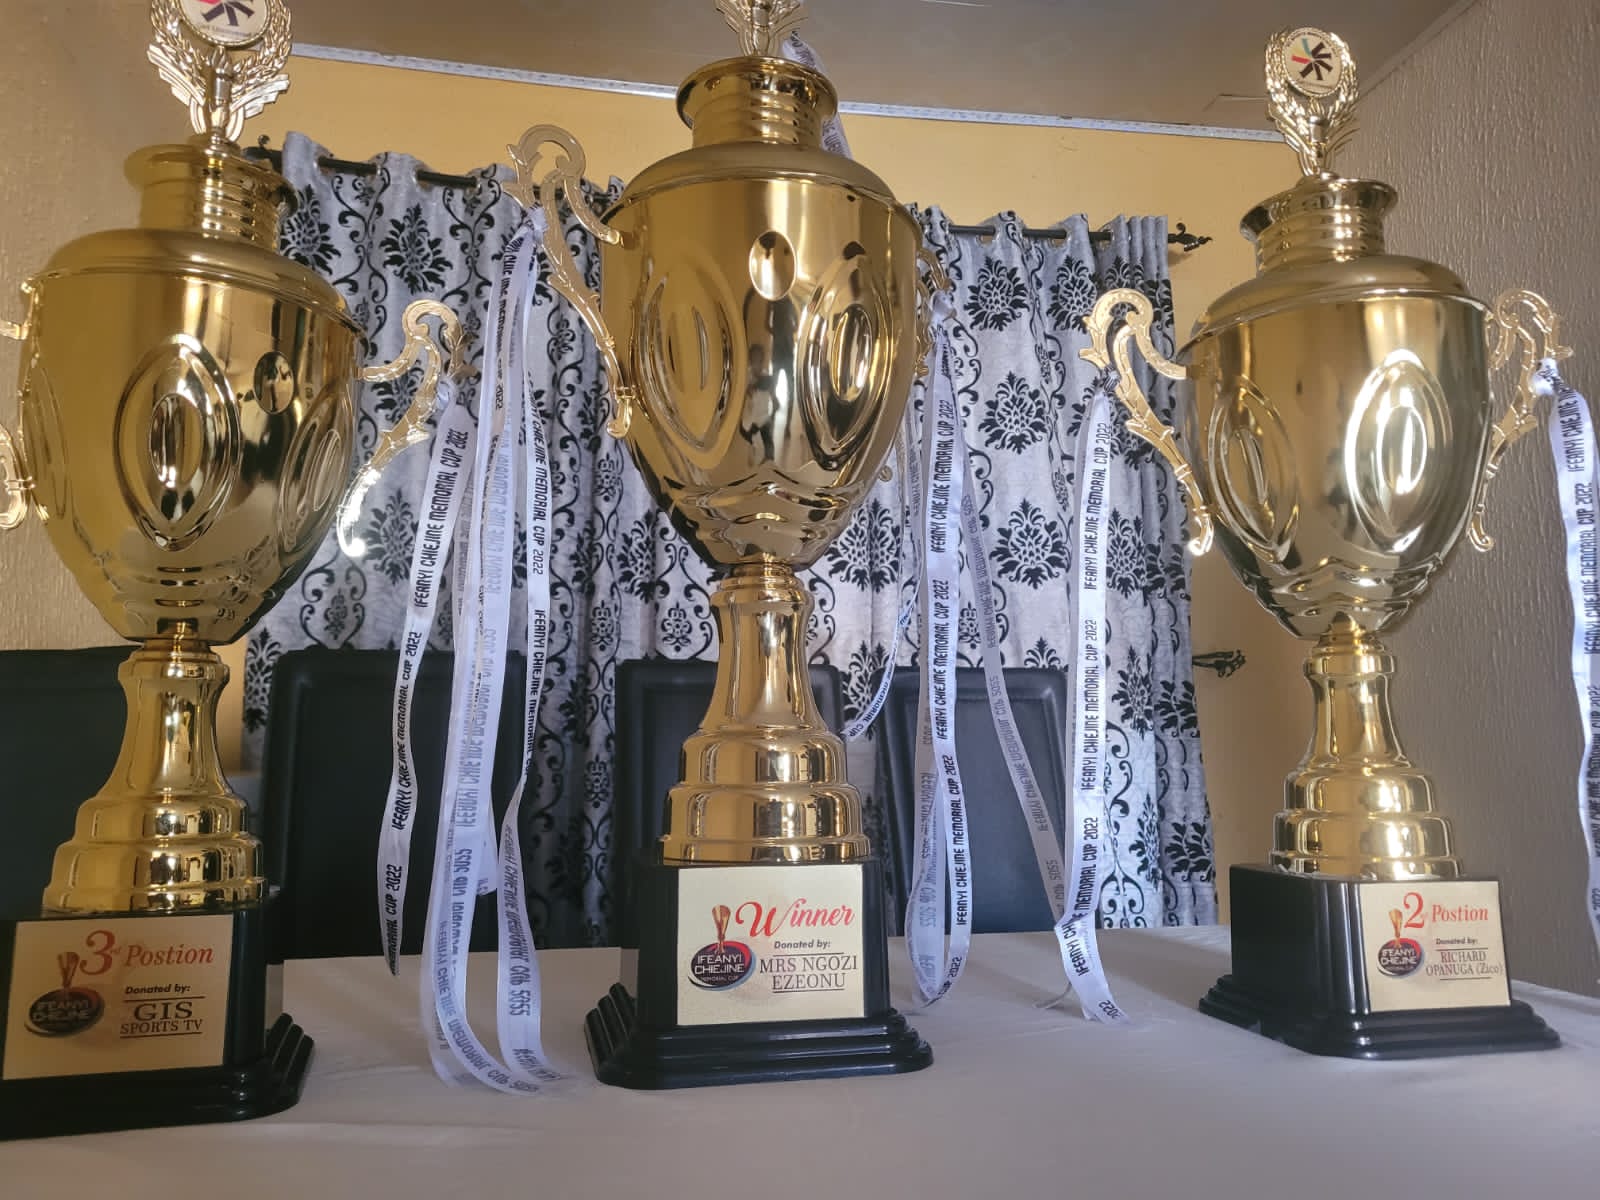 Ifeanyi Chiejine Memorial Tournament: Paul Tallen,Ned Nwoke, Ibrahim Gusua  And Other Top Digniteries To Storm Asaba For The Grand Finale